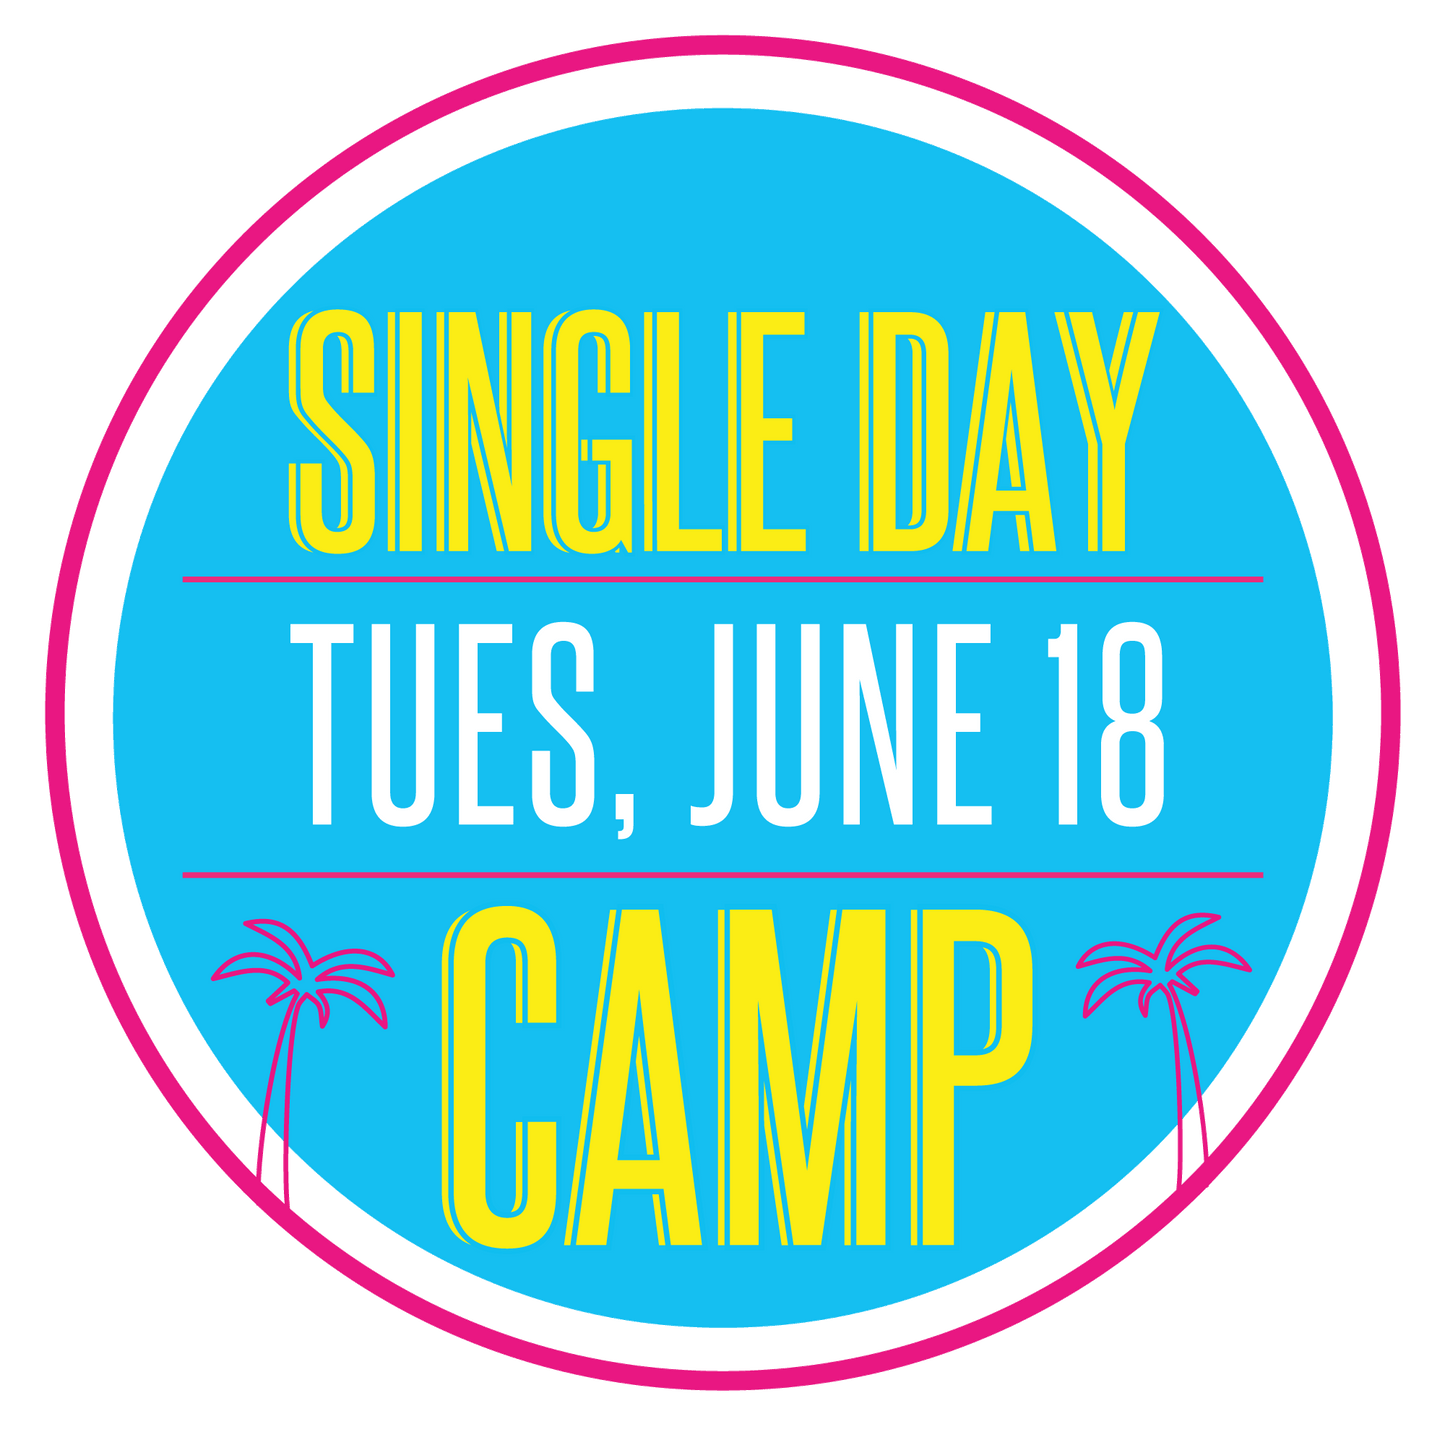 Single Day Sewing Workshop: Tuesday, June 18, 9am-3pm